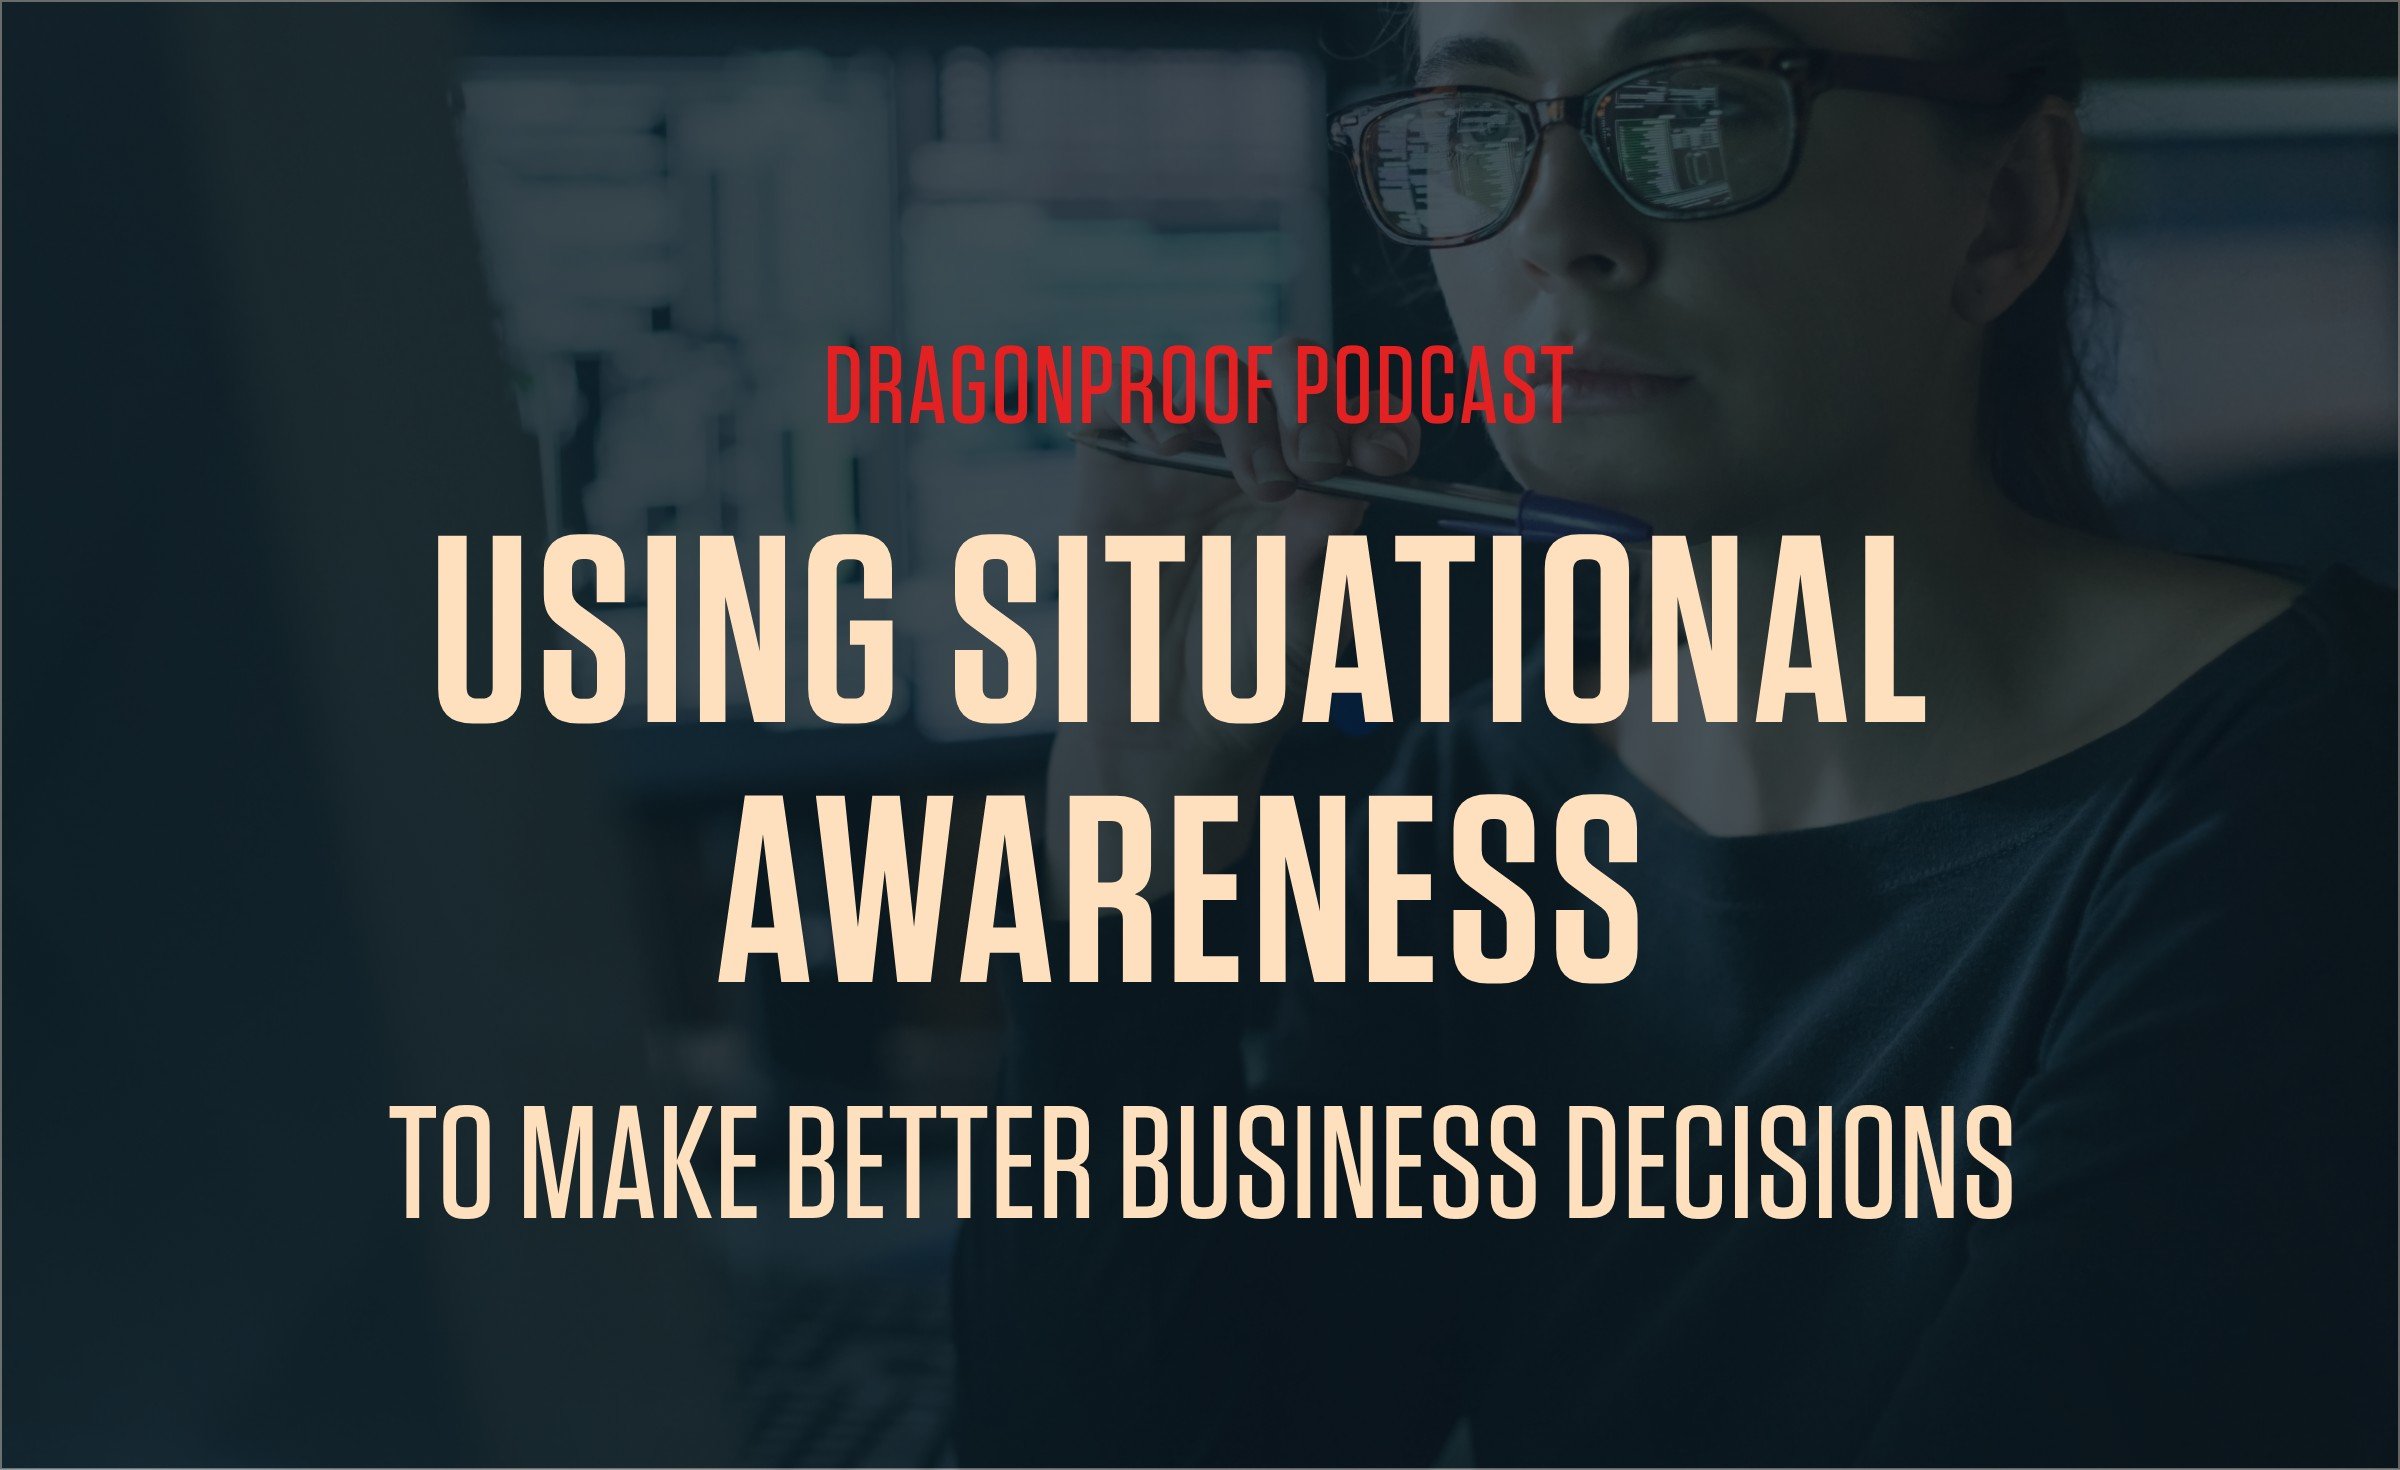 Dragonproof Podcast | Using Situational Awareness to Make Better Business Decisions